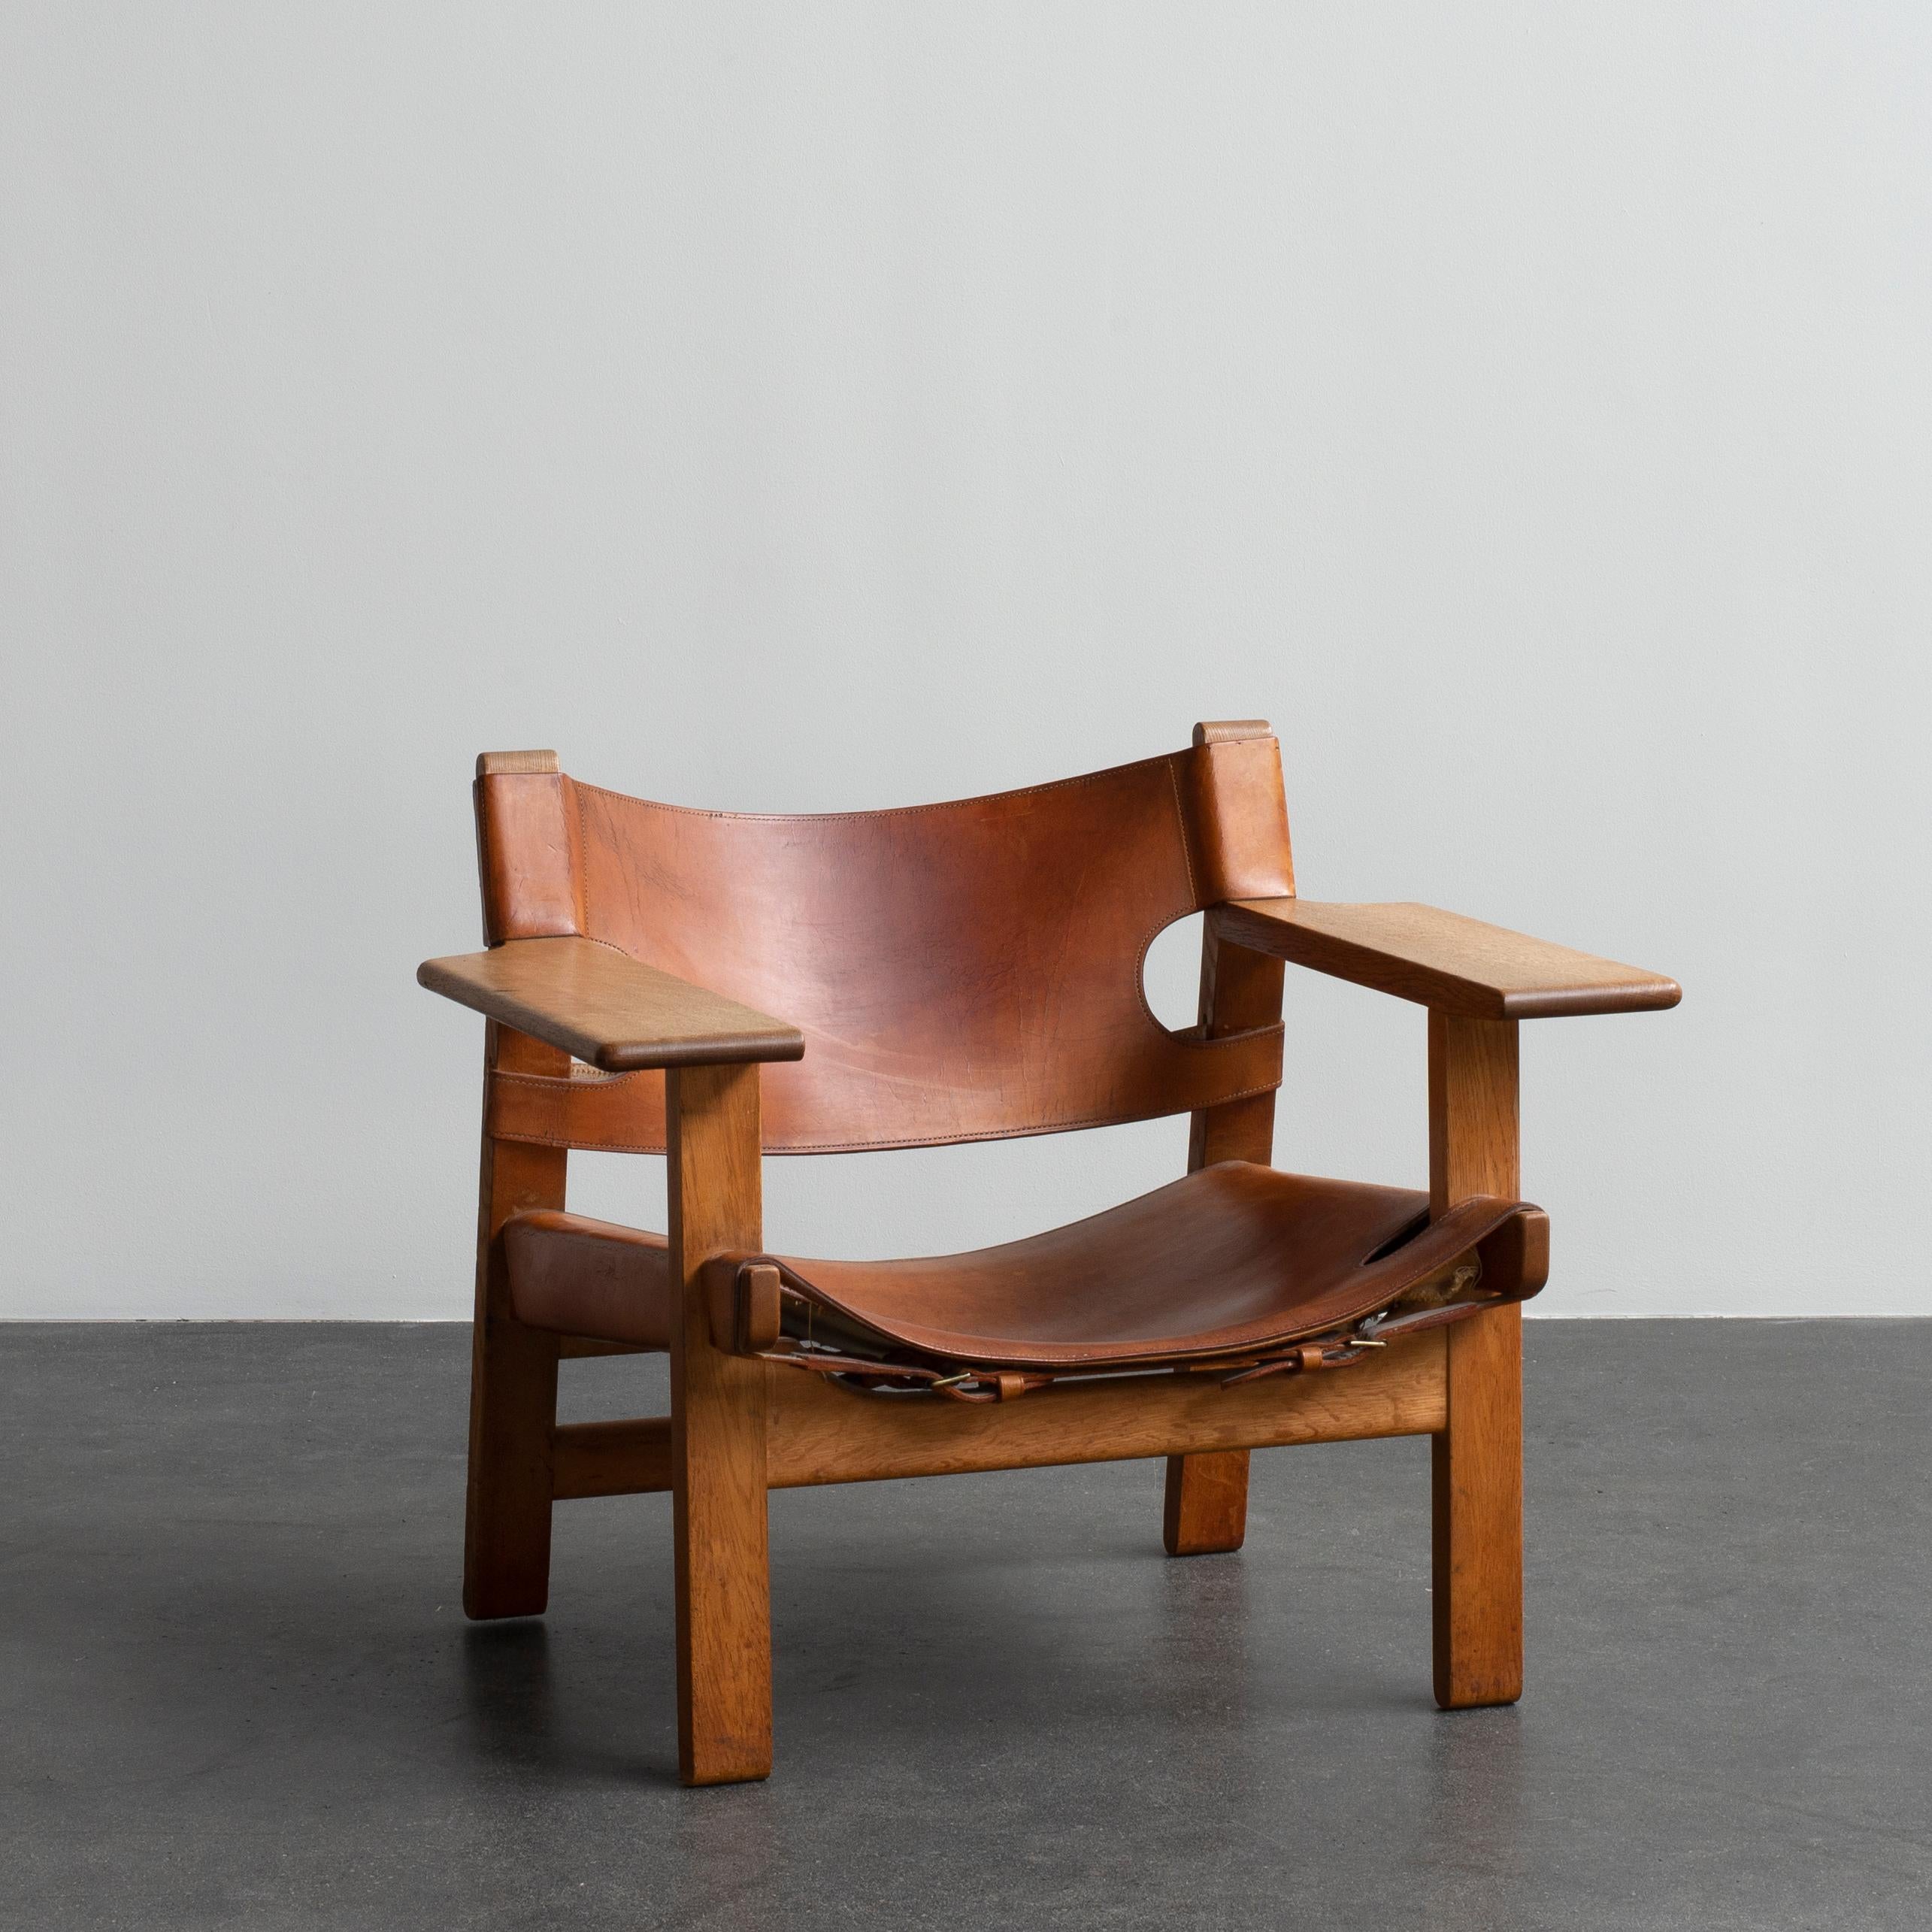 Børge Mogensen Spanish chair in oak and natural tanned leather. Executed by Fredericia Furniture and Dahlman Saddlers, Copenhagen.